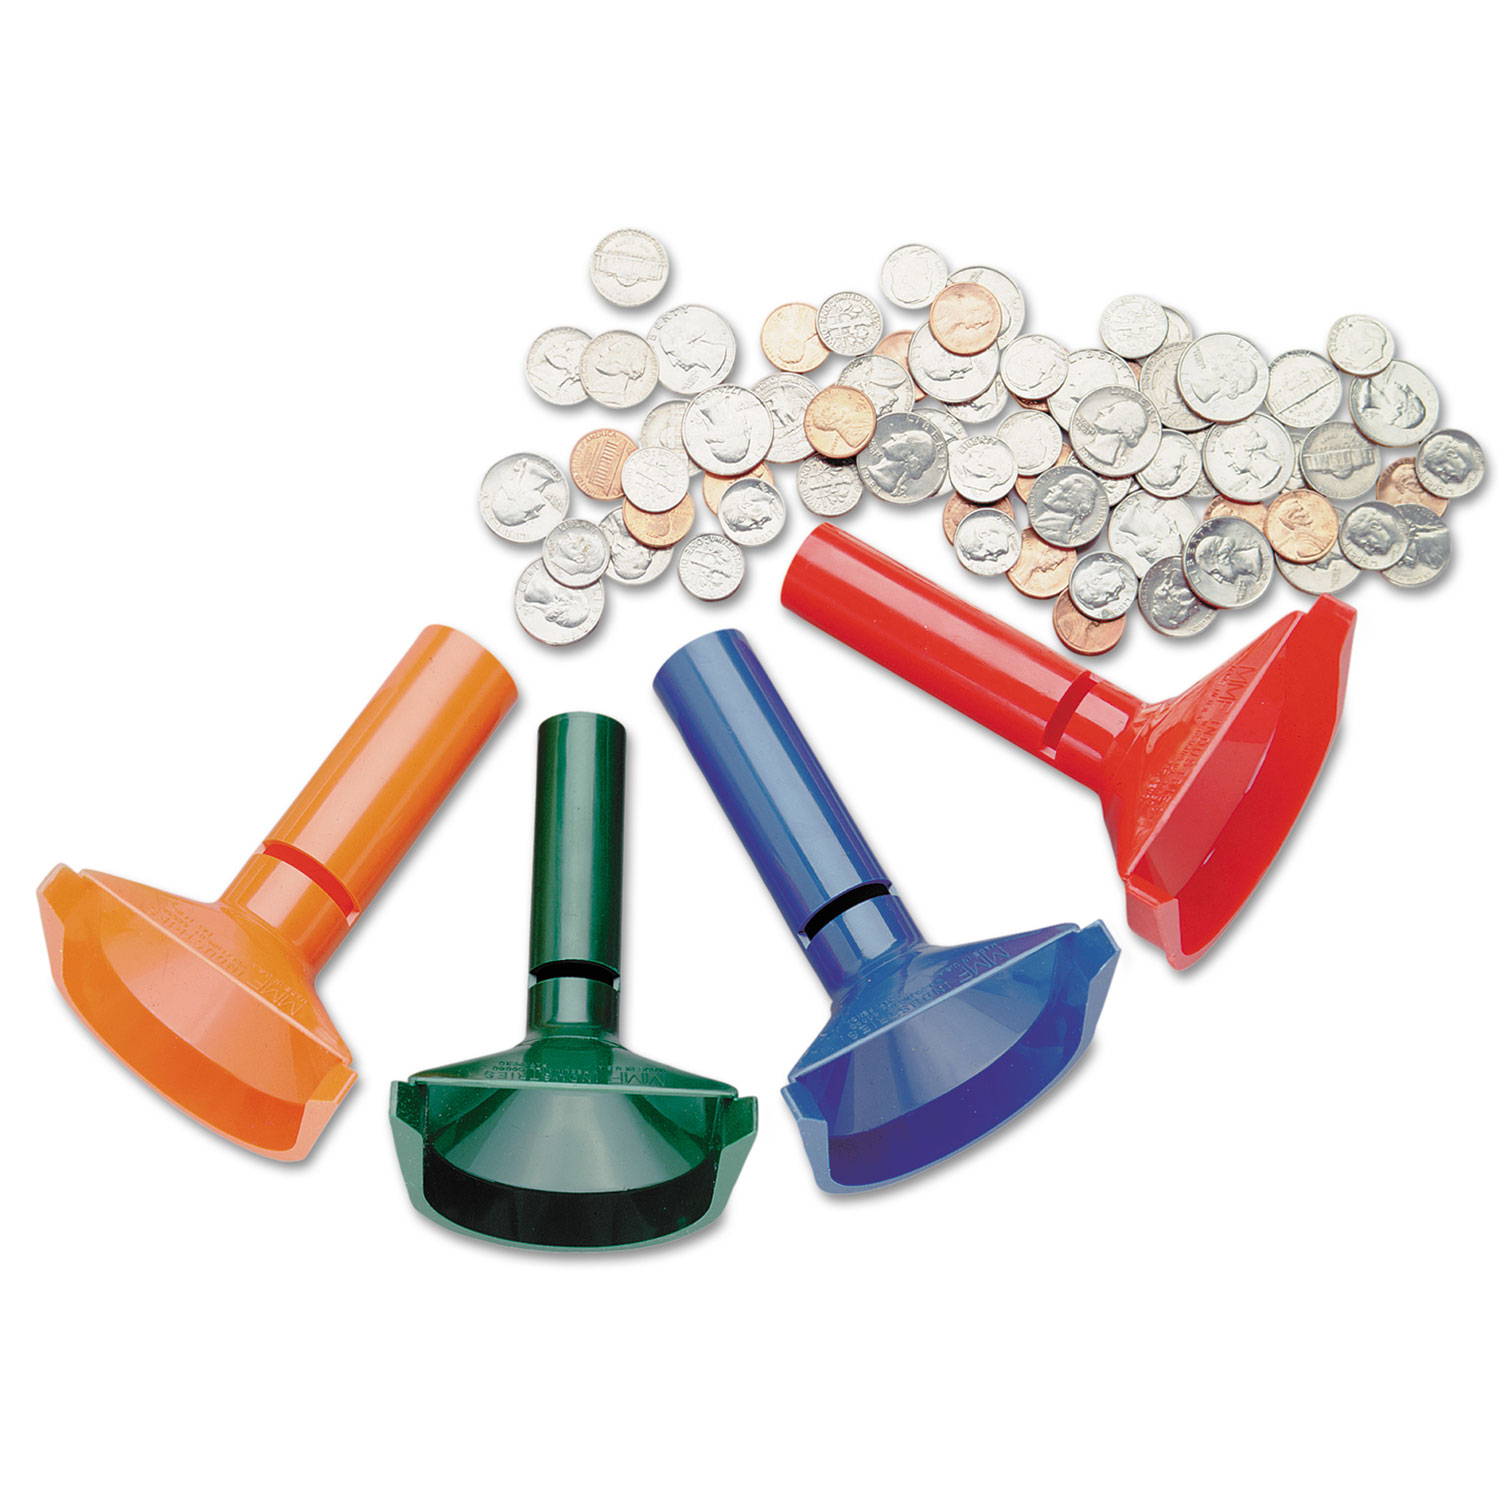  SteelMaster 224000400 Color-Coded Coin Counting Tubes f/Pennies Through Quarters (MMF224000400) 